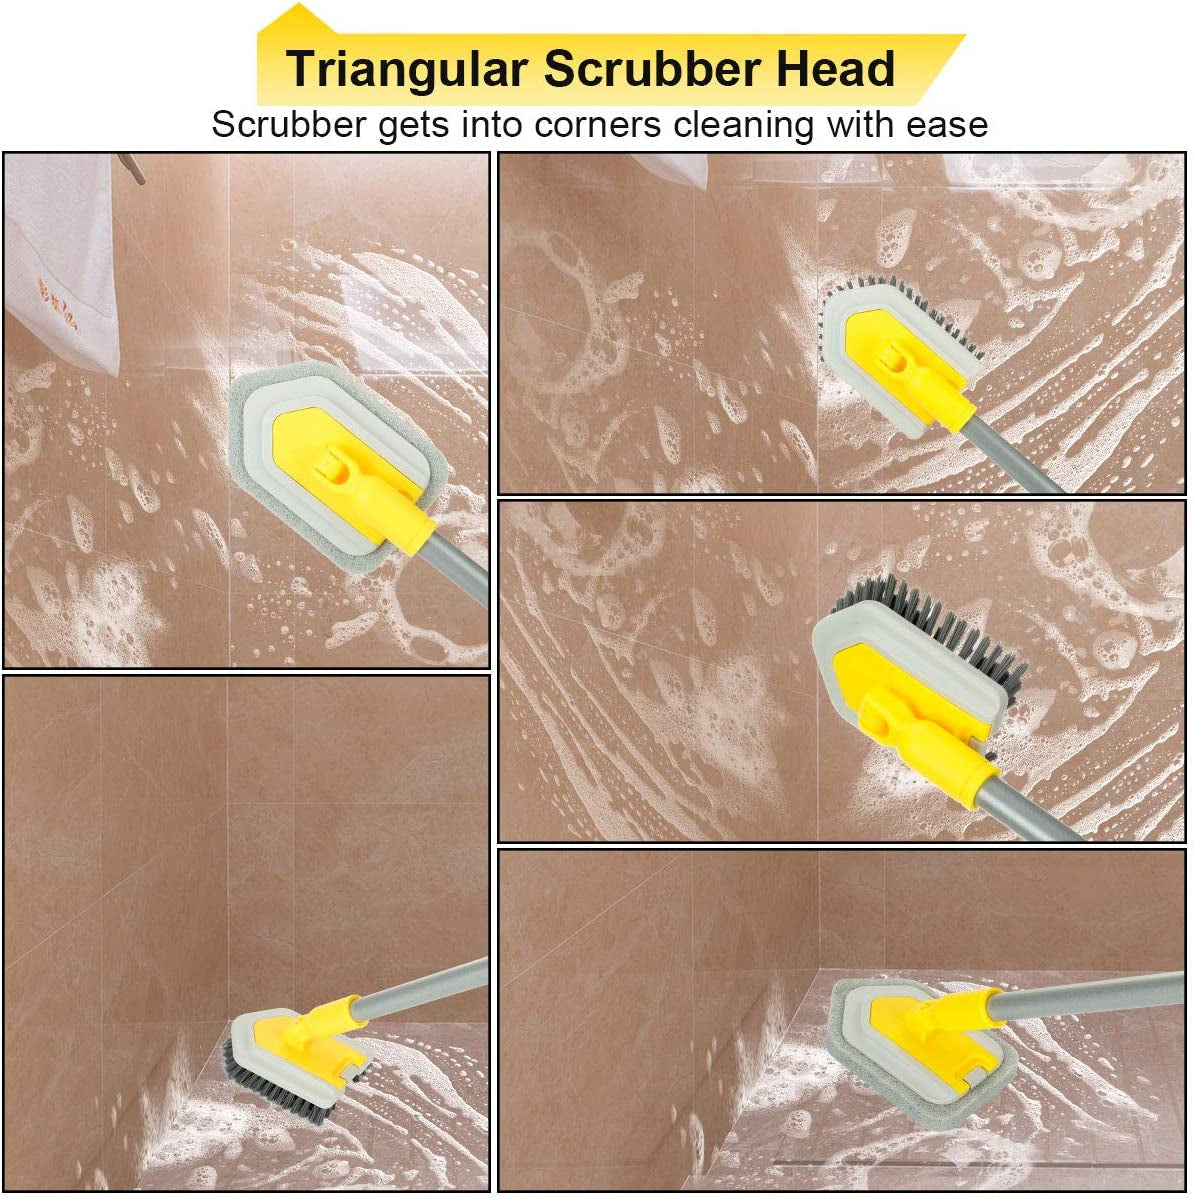 Shower Cleaning Brush 2 in 1 Tub and Tile Scrubber Brush 46'' Extendable  Handle